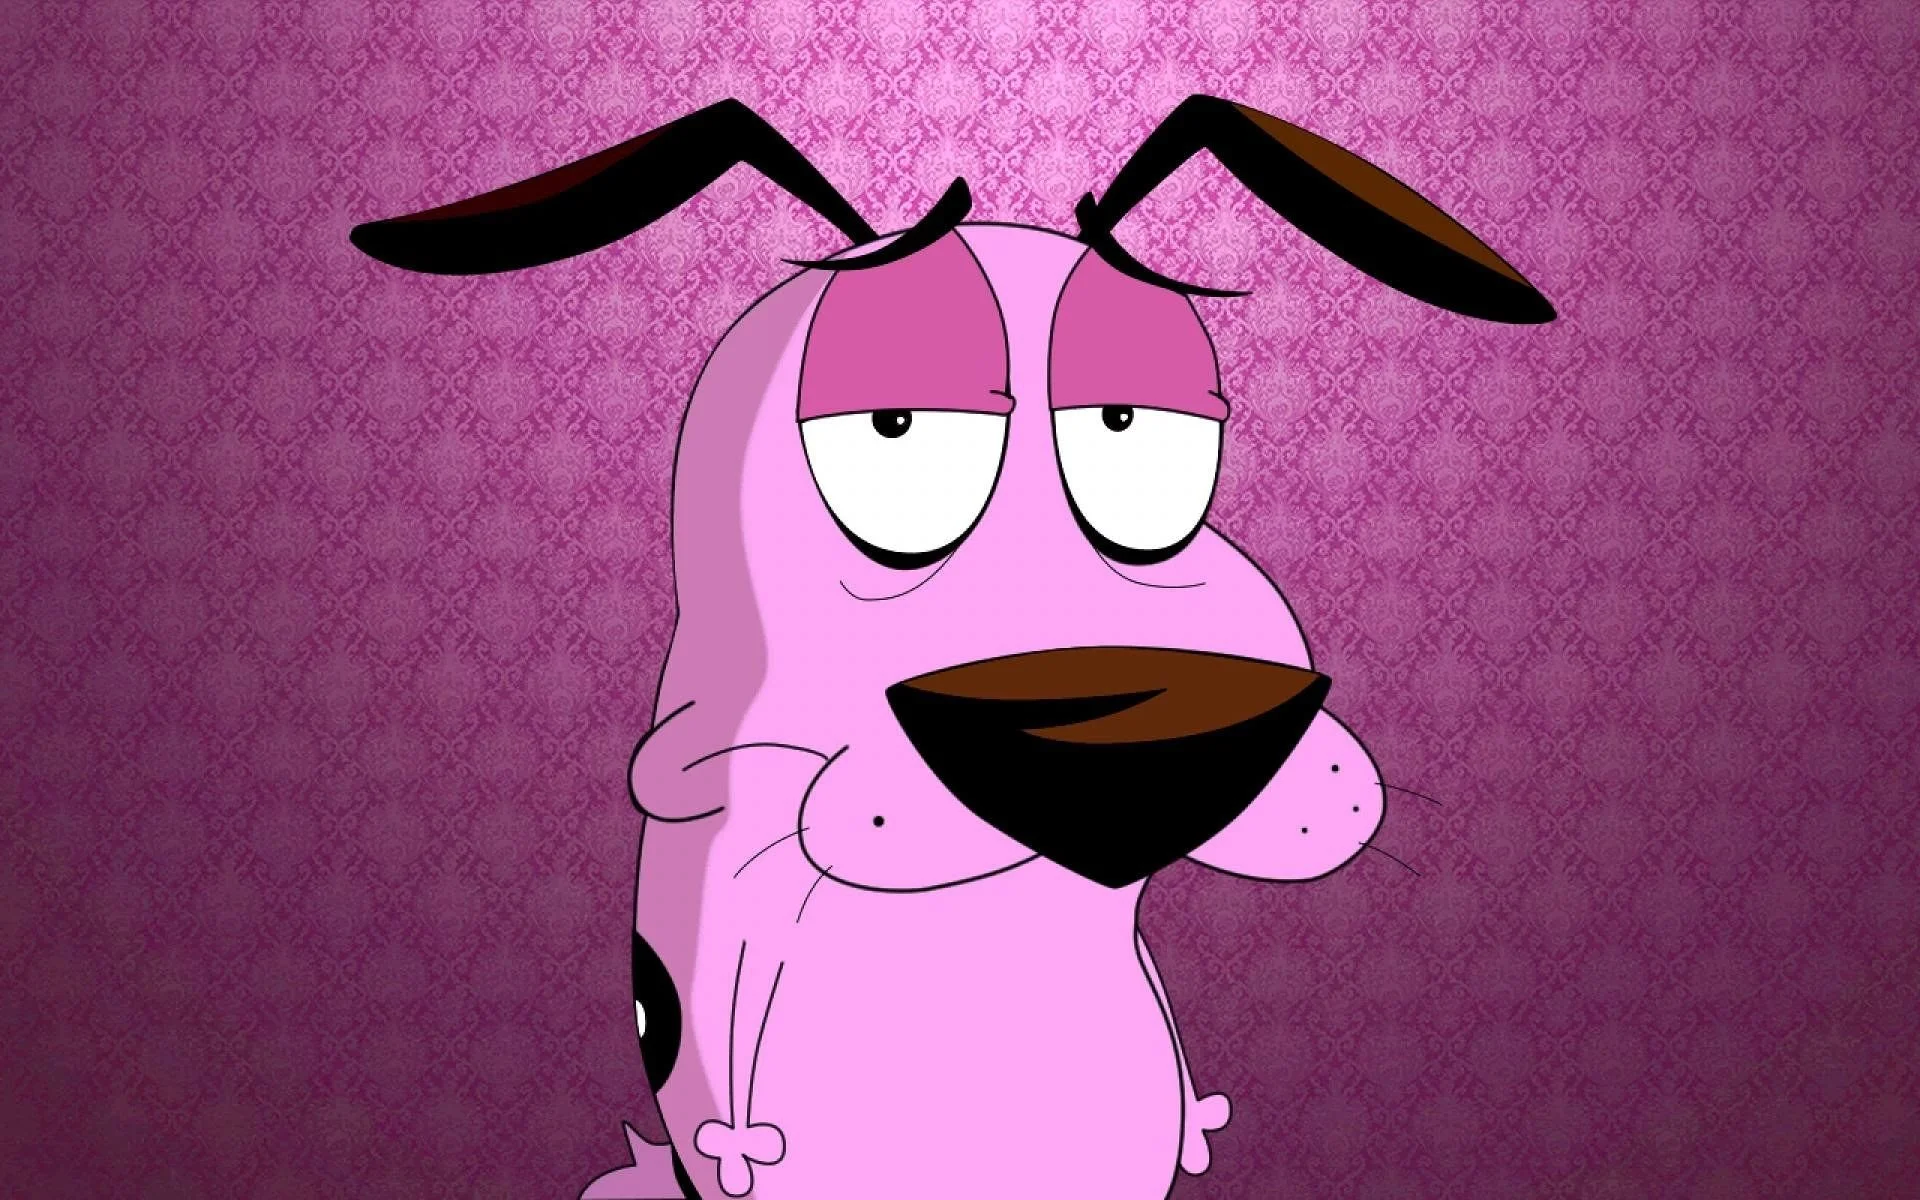 1. Courage the Cowardly Dog - wide 5